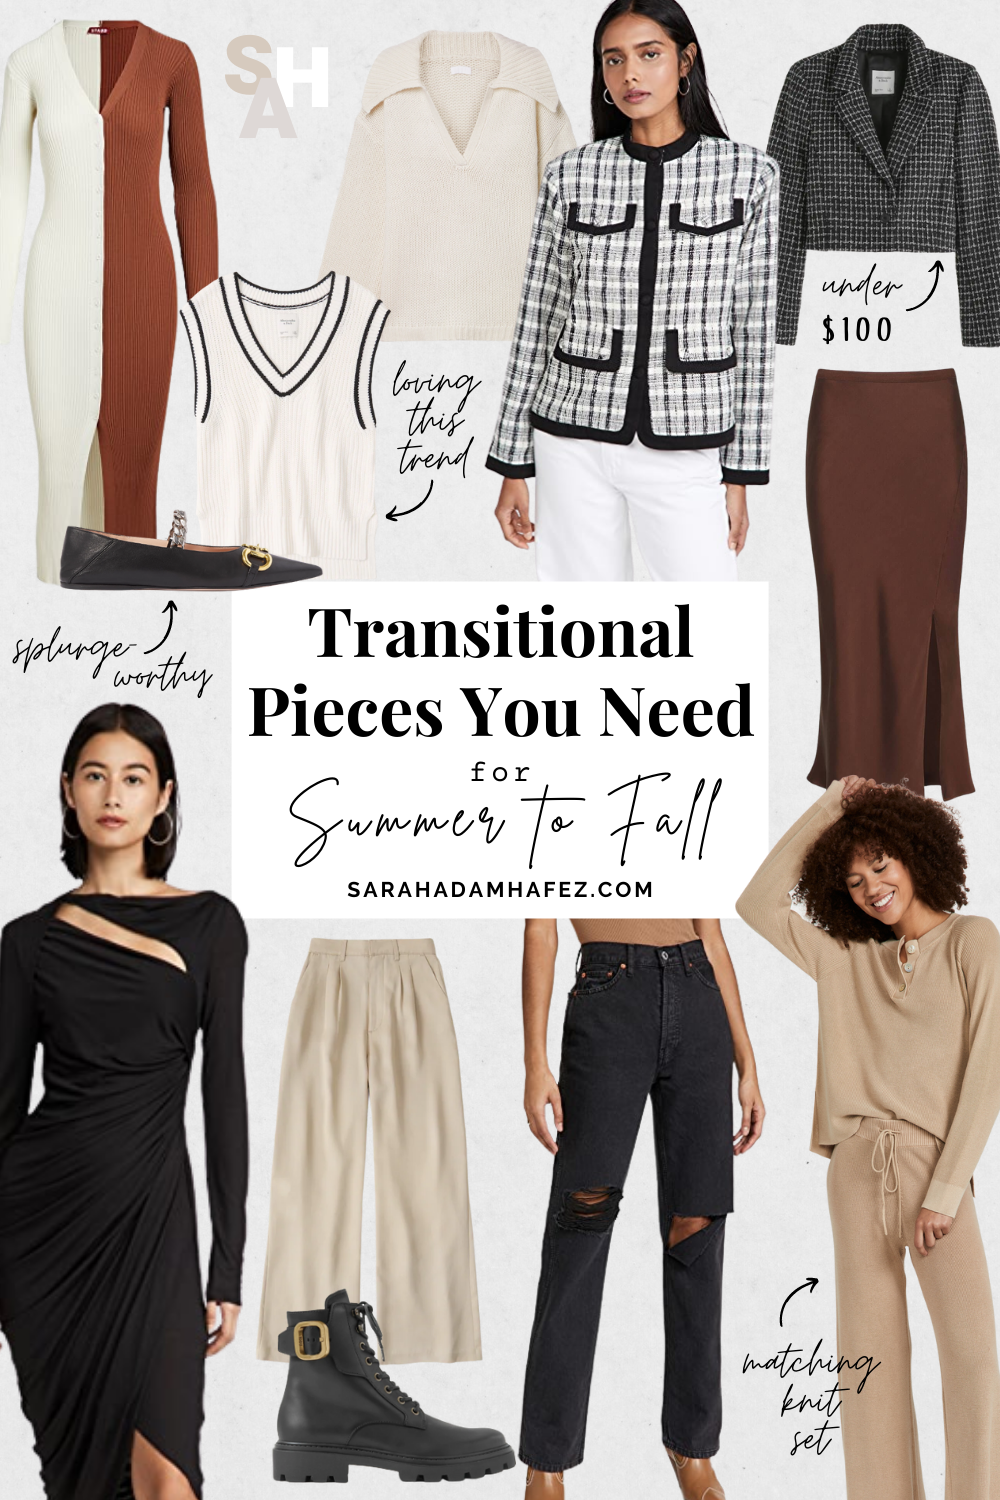 how to transition from summer to fall, how to transition your closet from summer to fall, transitioning from summer to fall